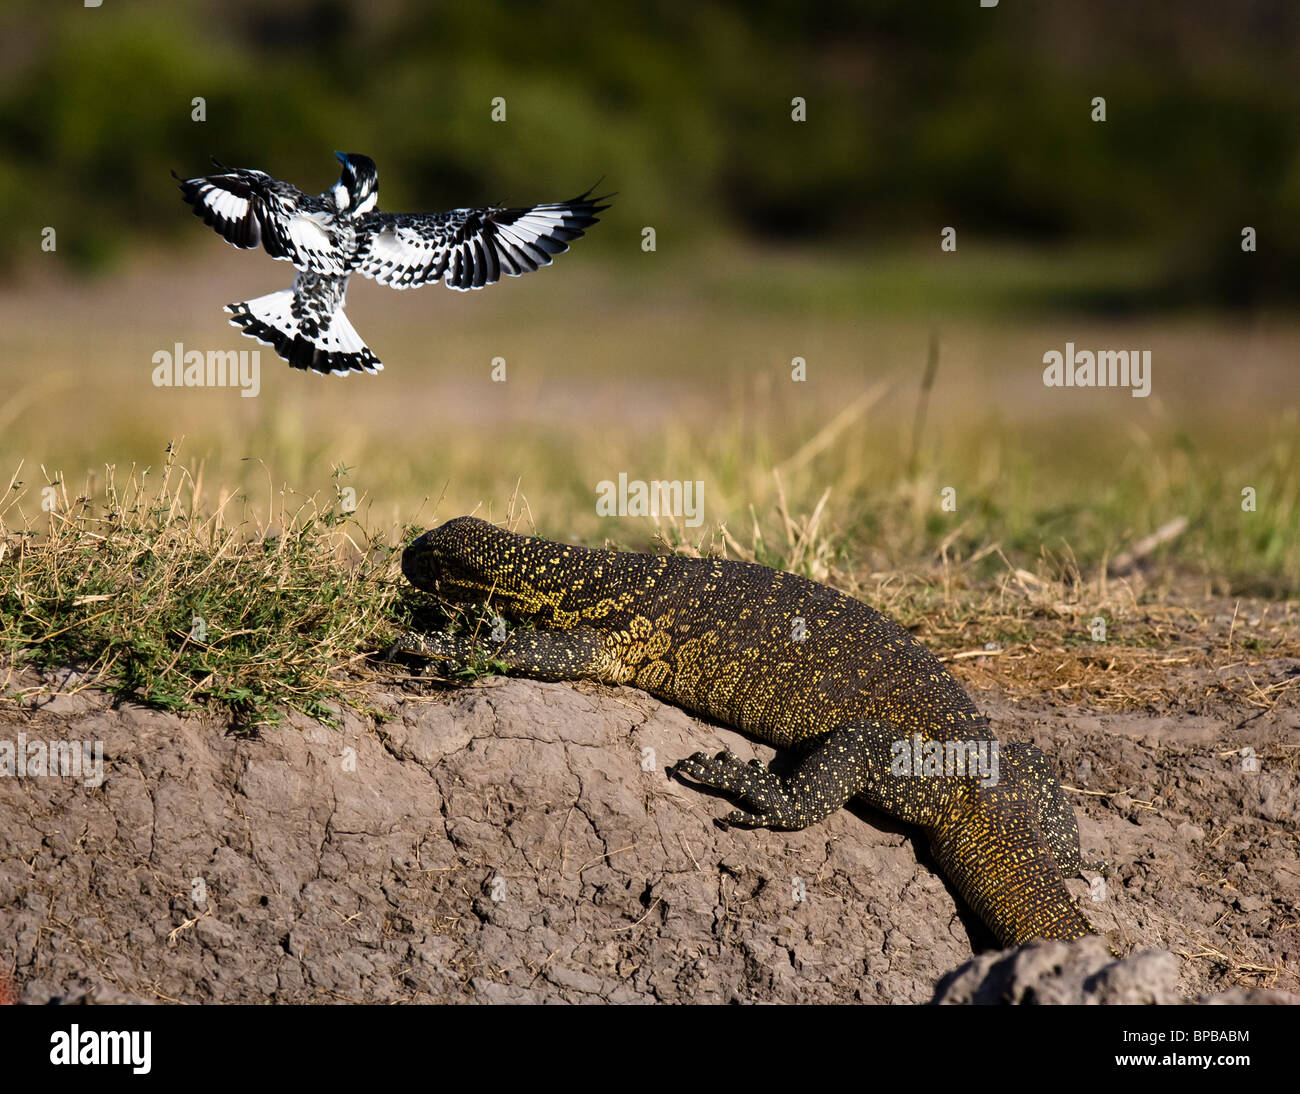 Pied Kingfisher (Ceryle rudis) being chased from nest by Monitor Lizard, Botswana, June 2009 Stock Photo